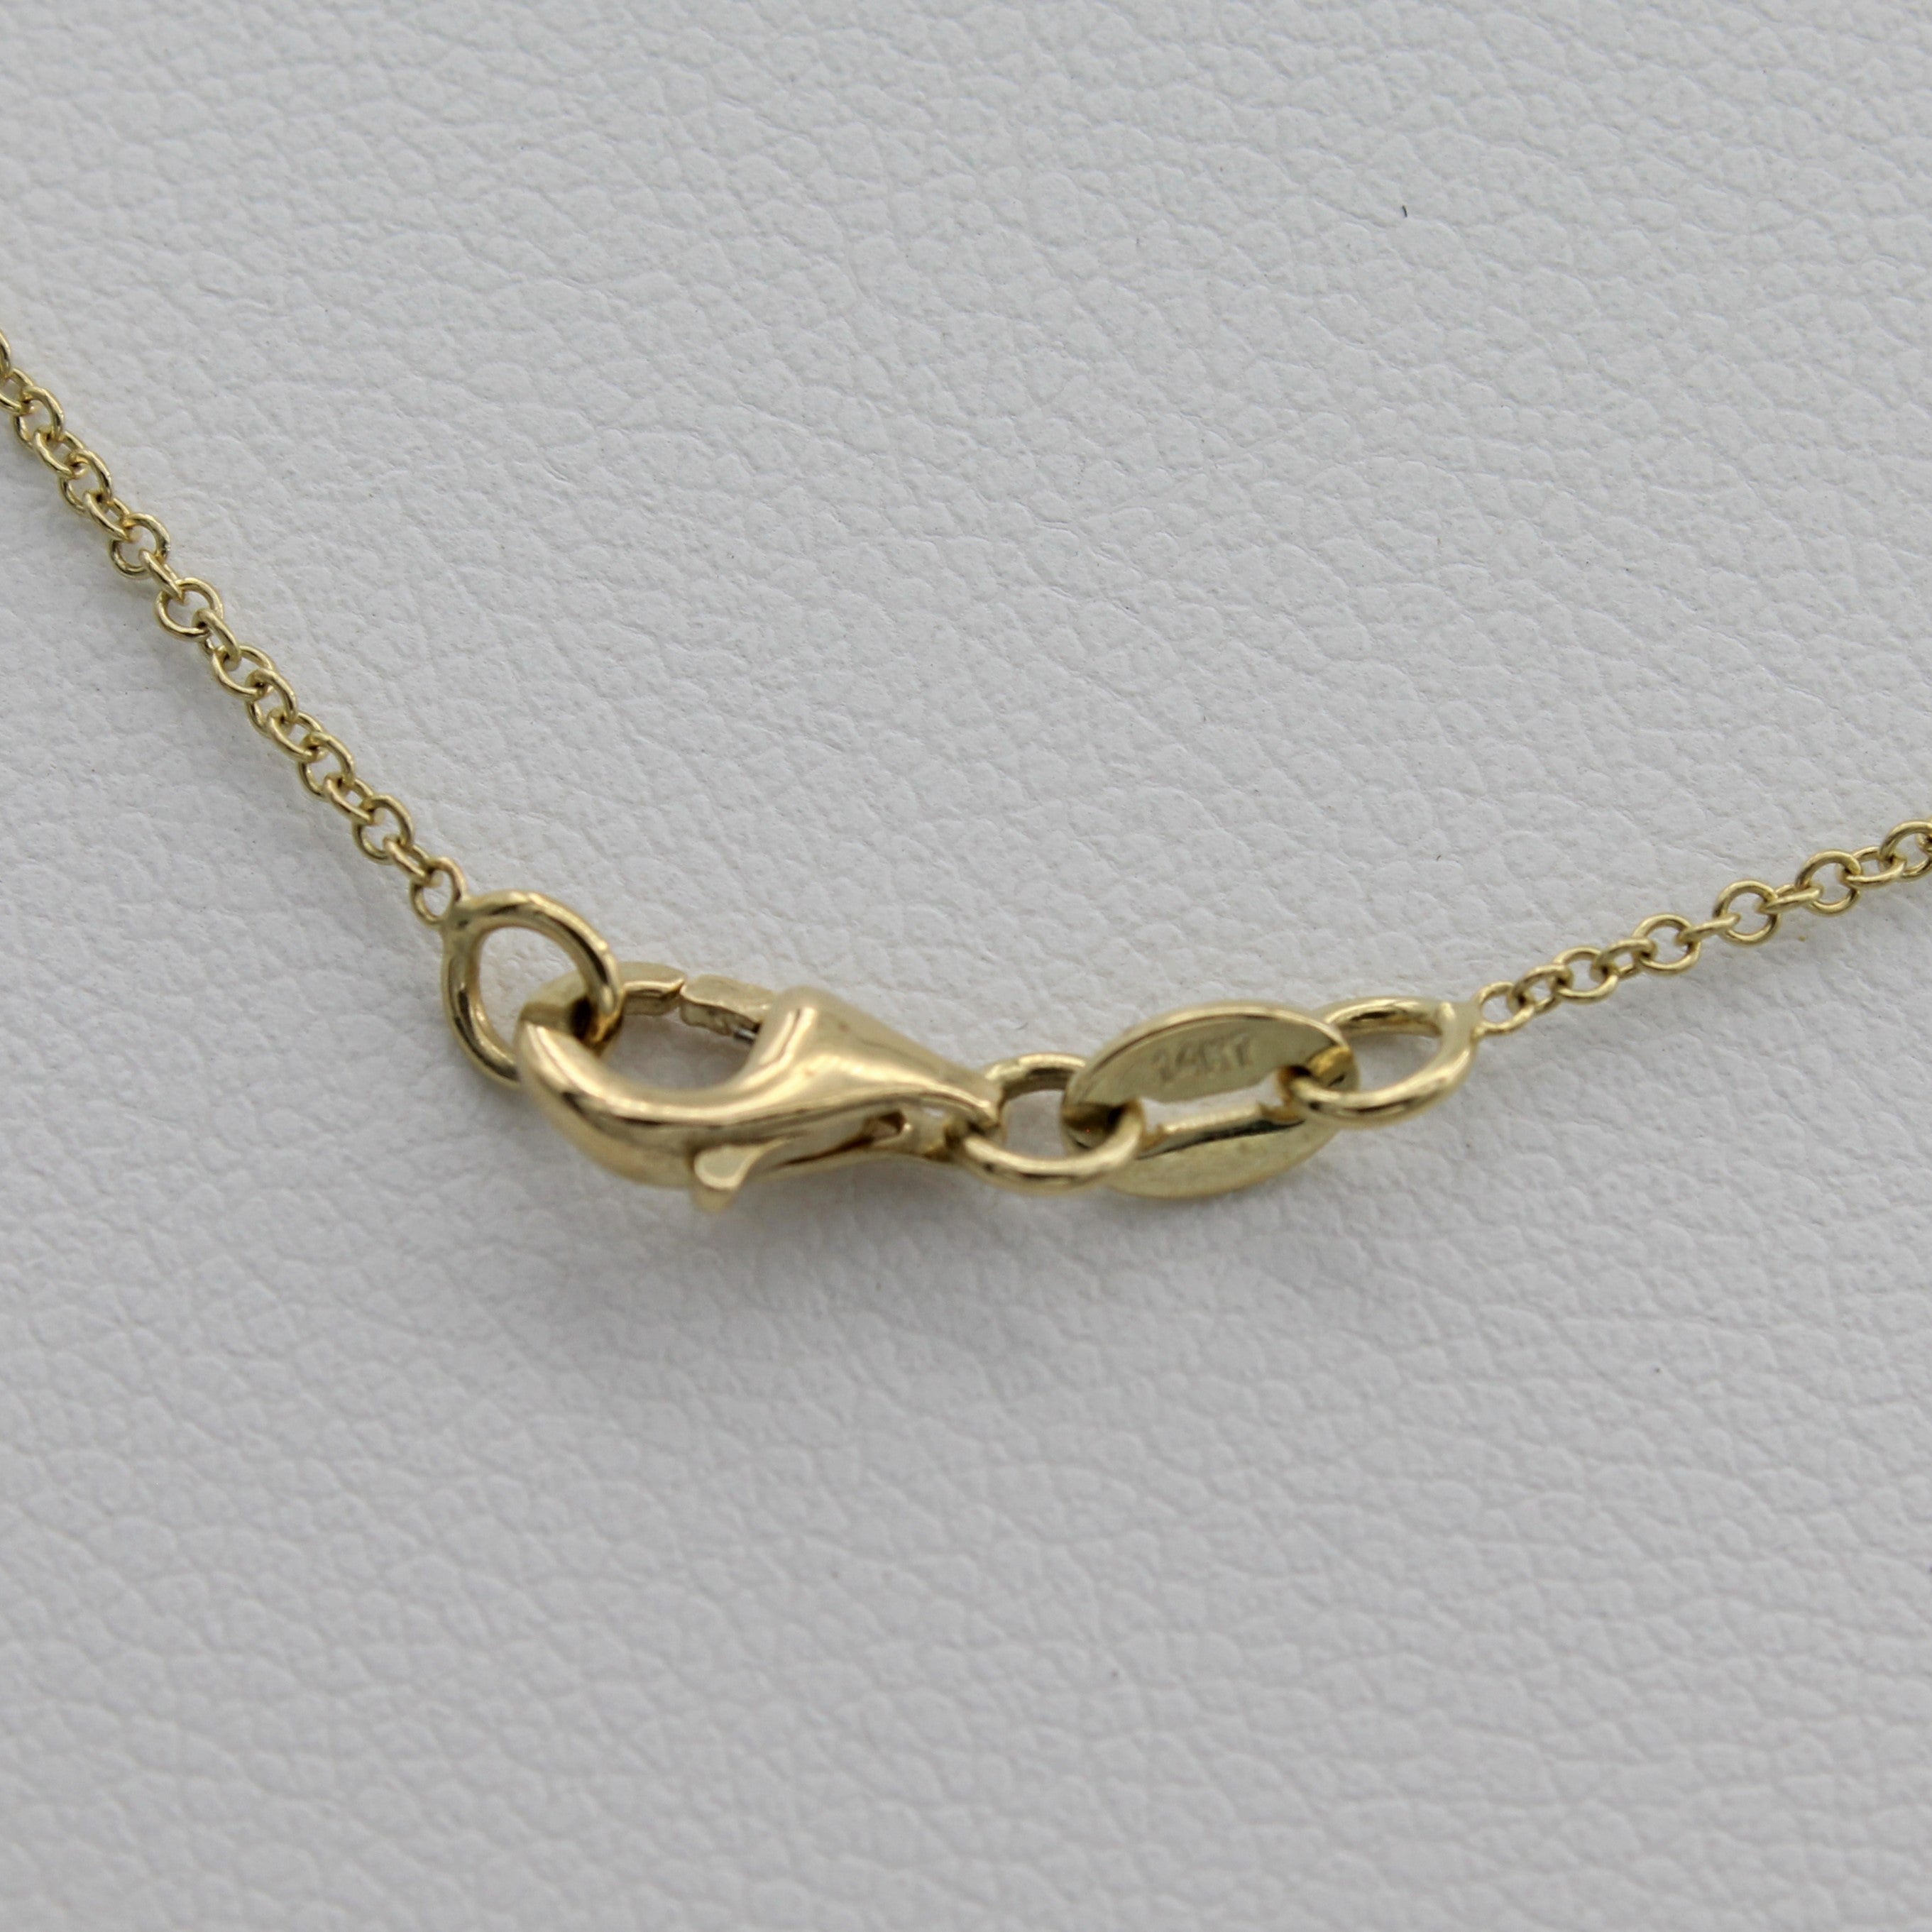 14k Yellow Gold Crescent Moon with Diamond Pendant, a view of the necklace's lobster clasp closure.